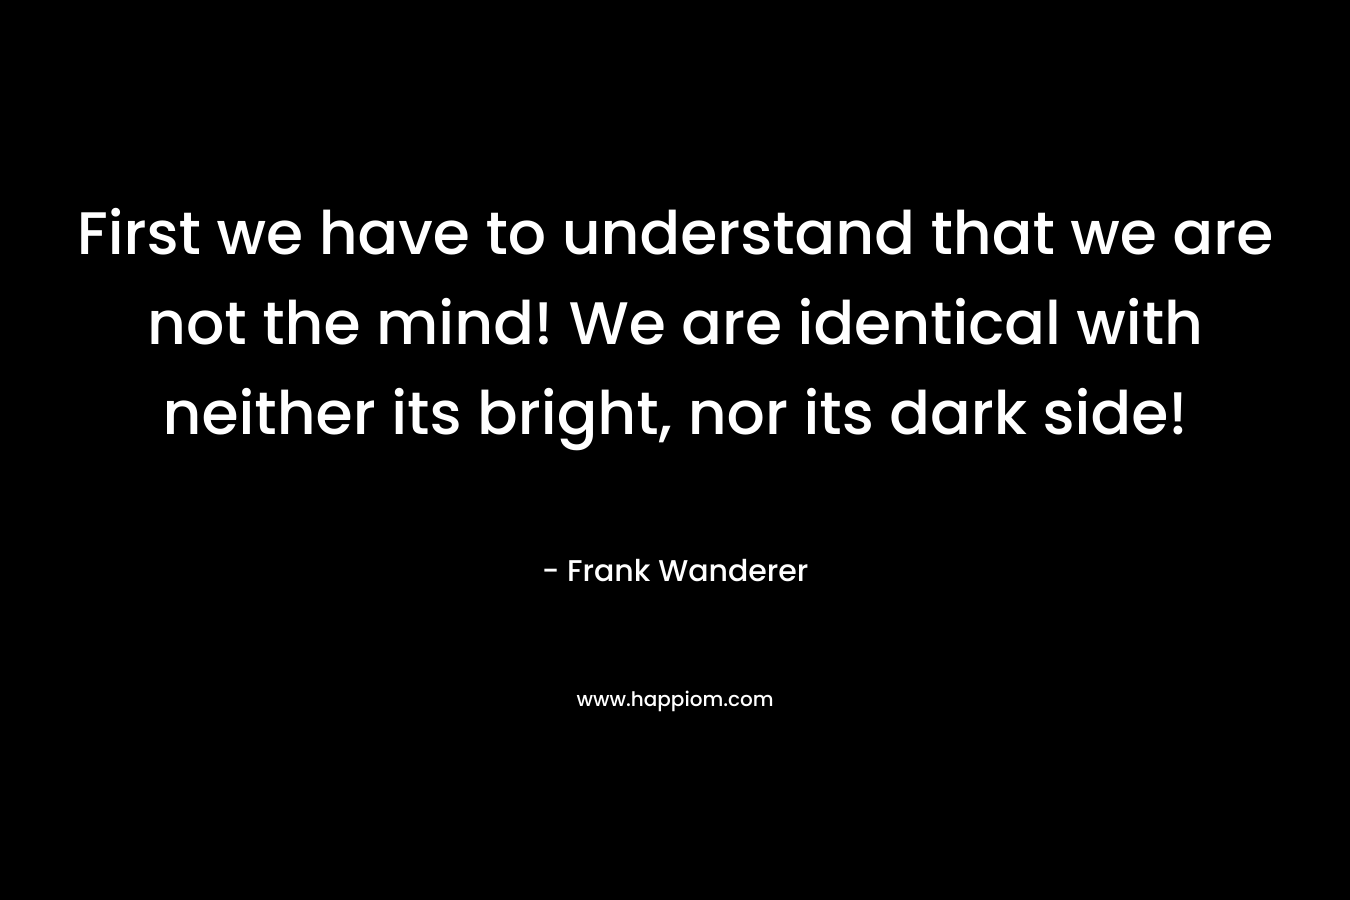 First we have to understand that we are not the mind! We are identical with neither its bright, nor its dark side!